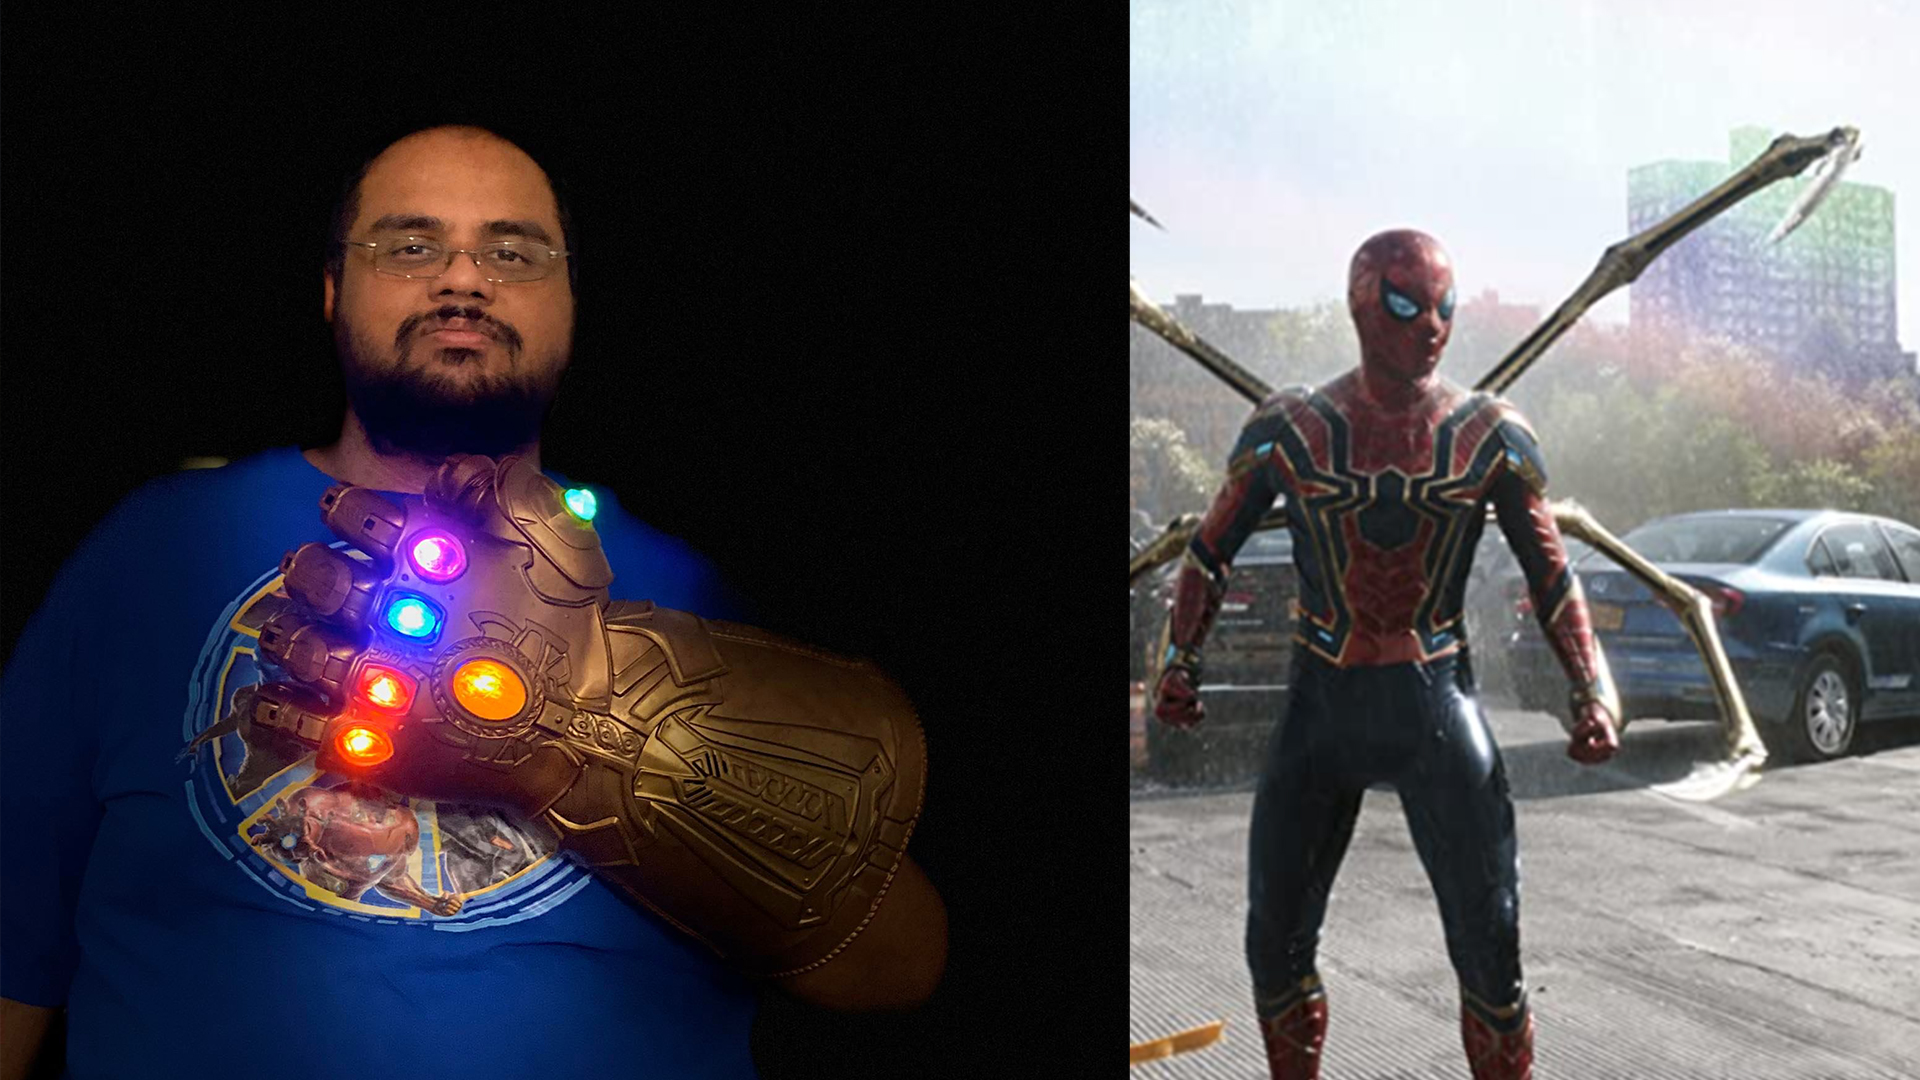 Watch: All you need to know about Bangladesh’s Wahid and his role in ‘Spider-Man: No Way Home’